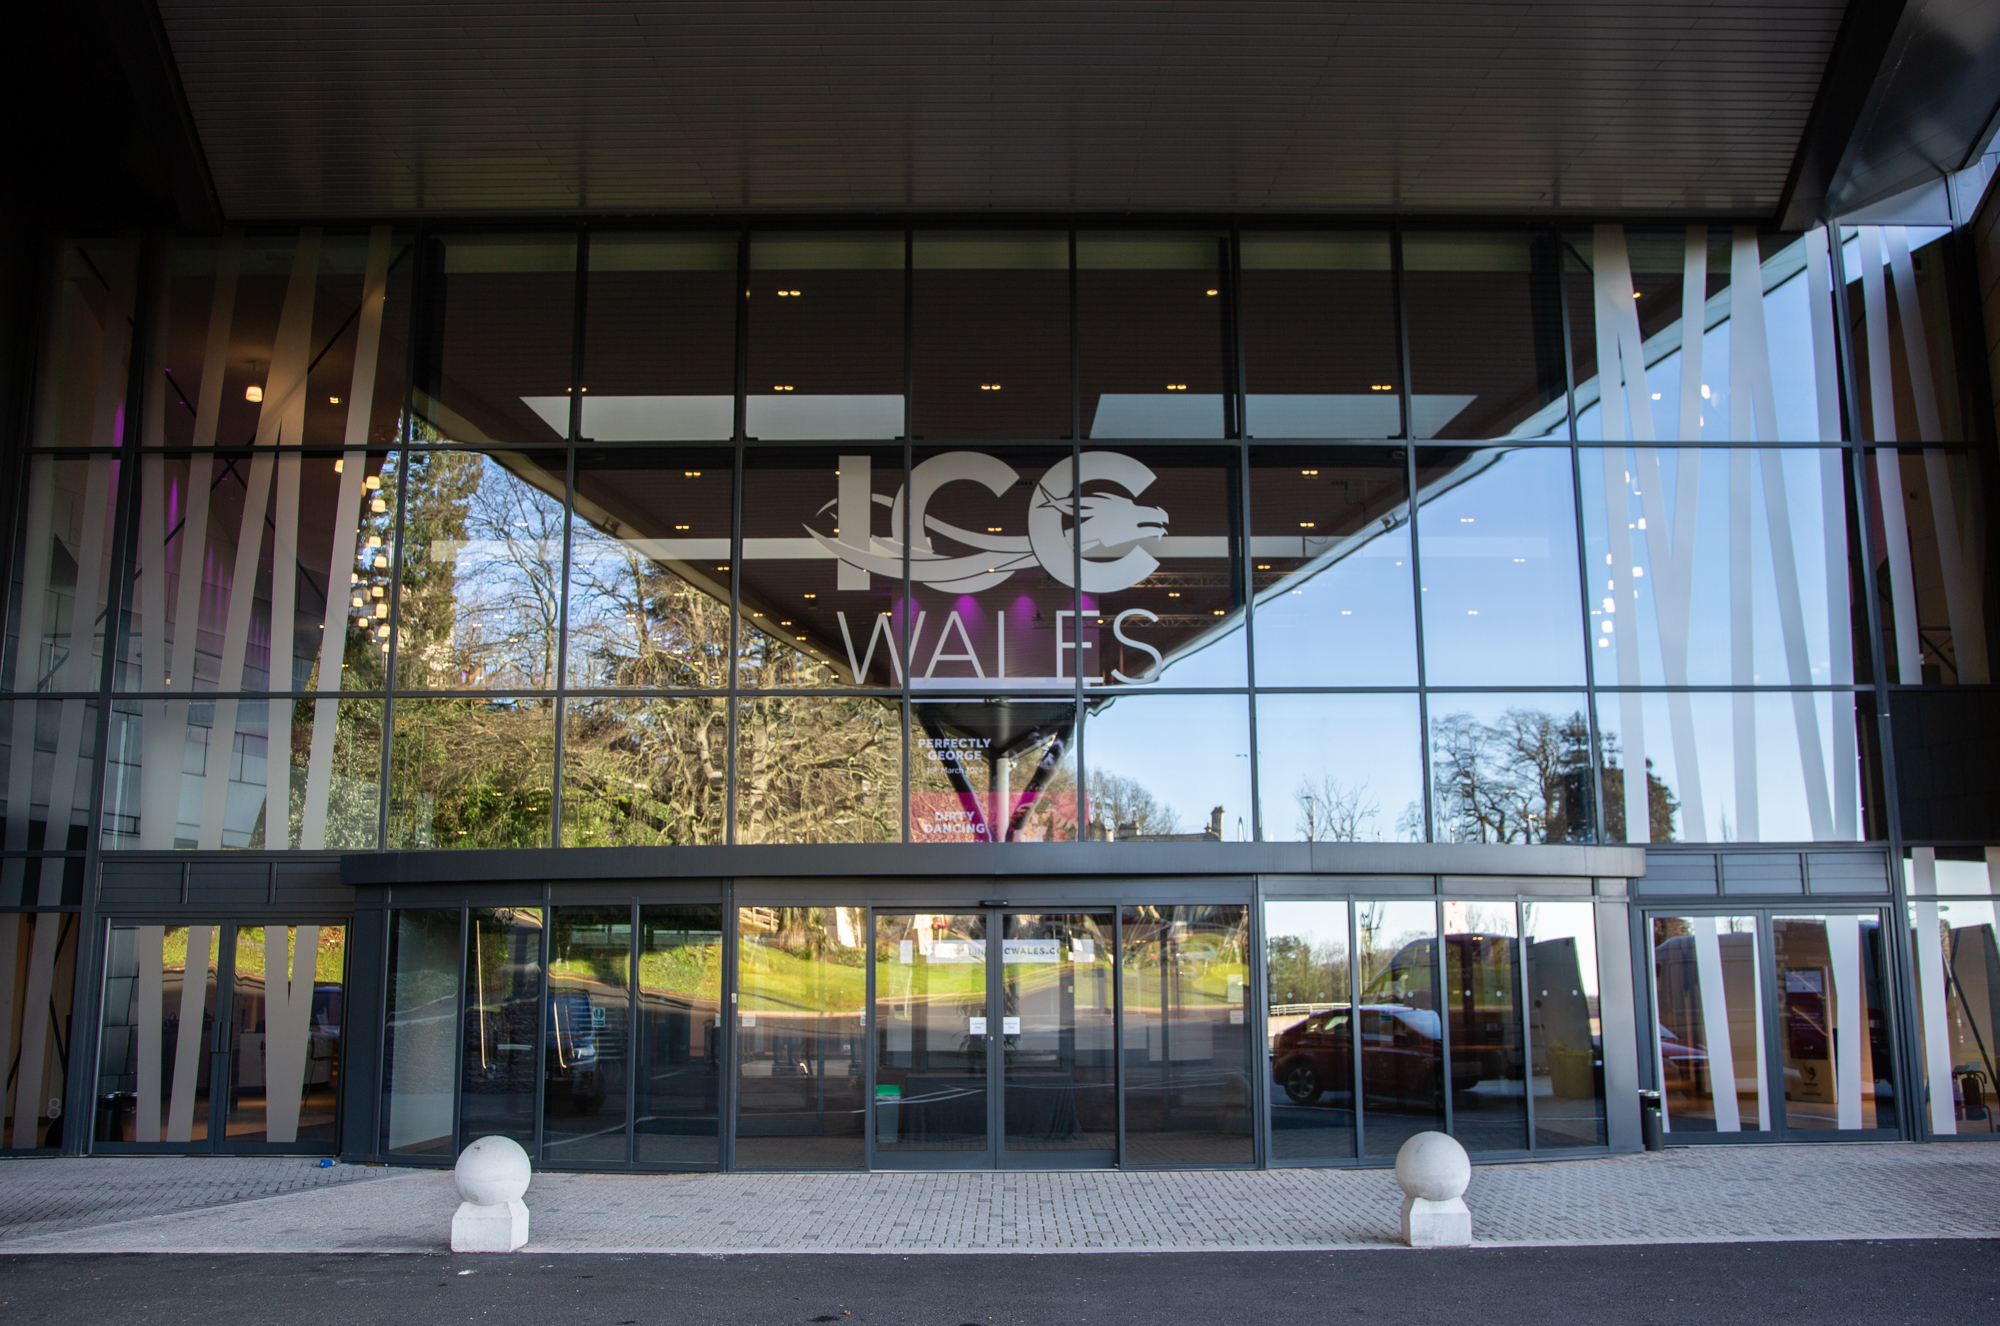 Front view of the ICCW building in Wales. It has a large glass front with the logo above the doors.